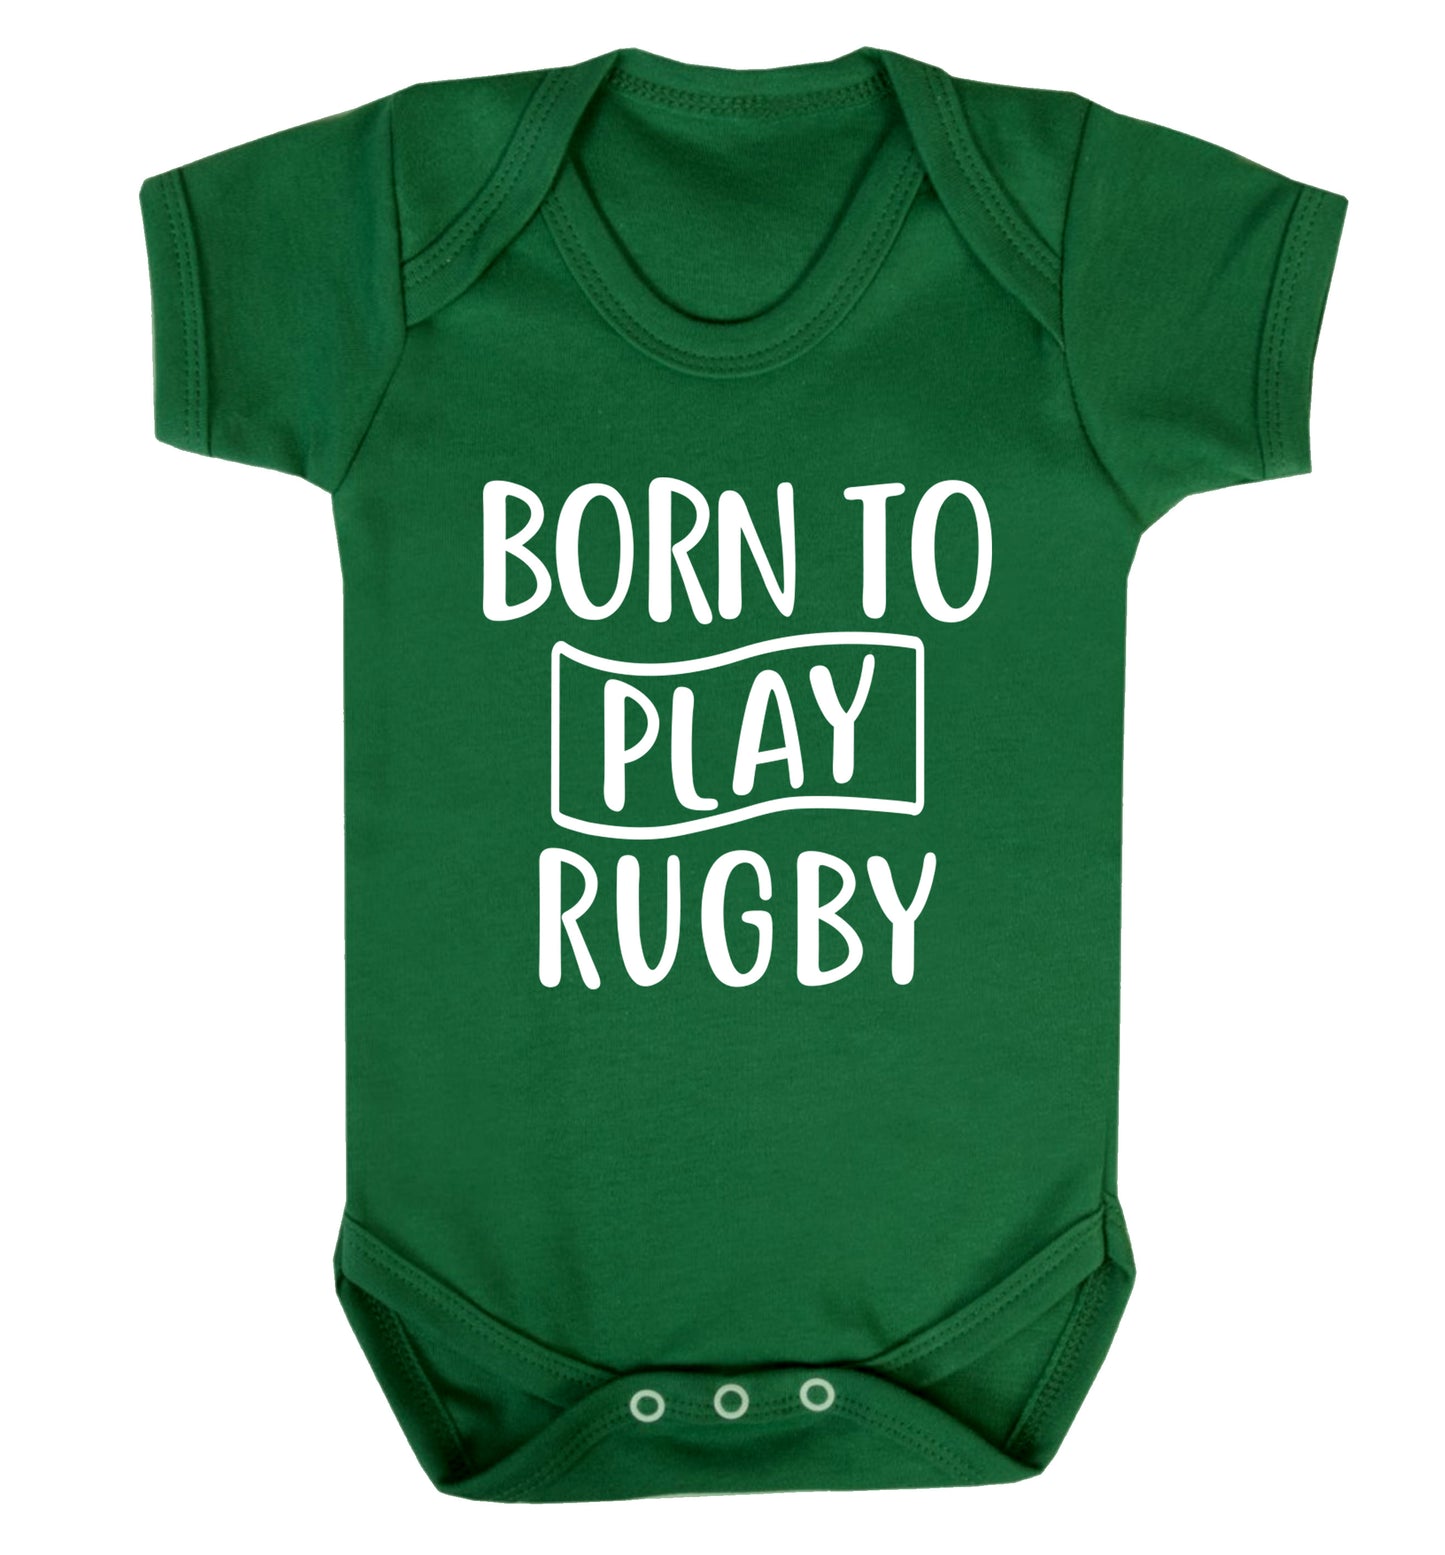 Born to play rugby Baby Vest green 18-24 months